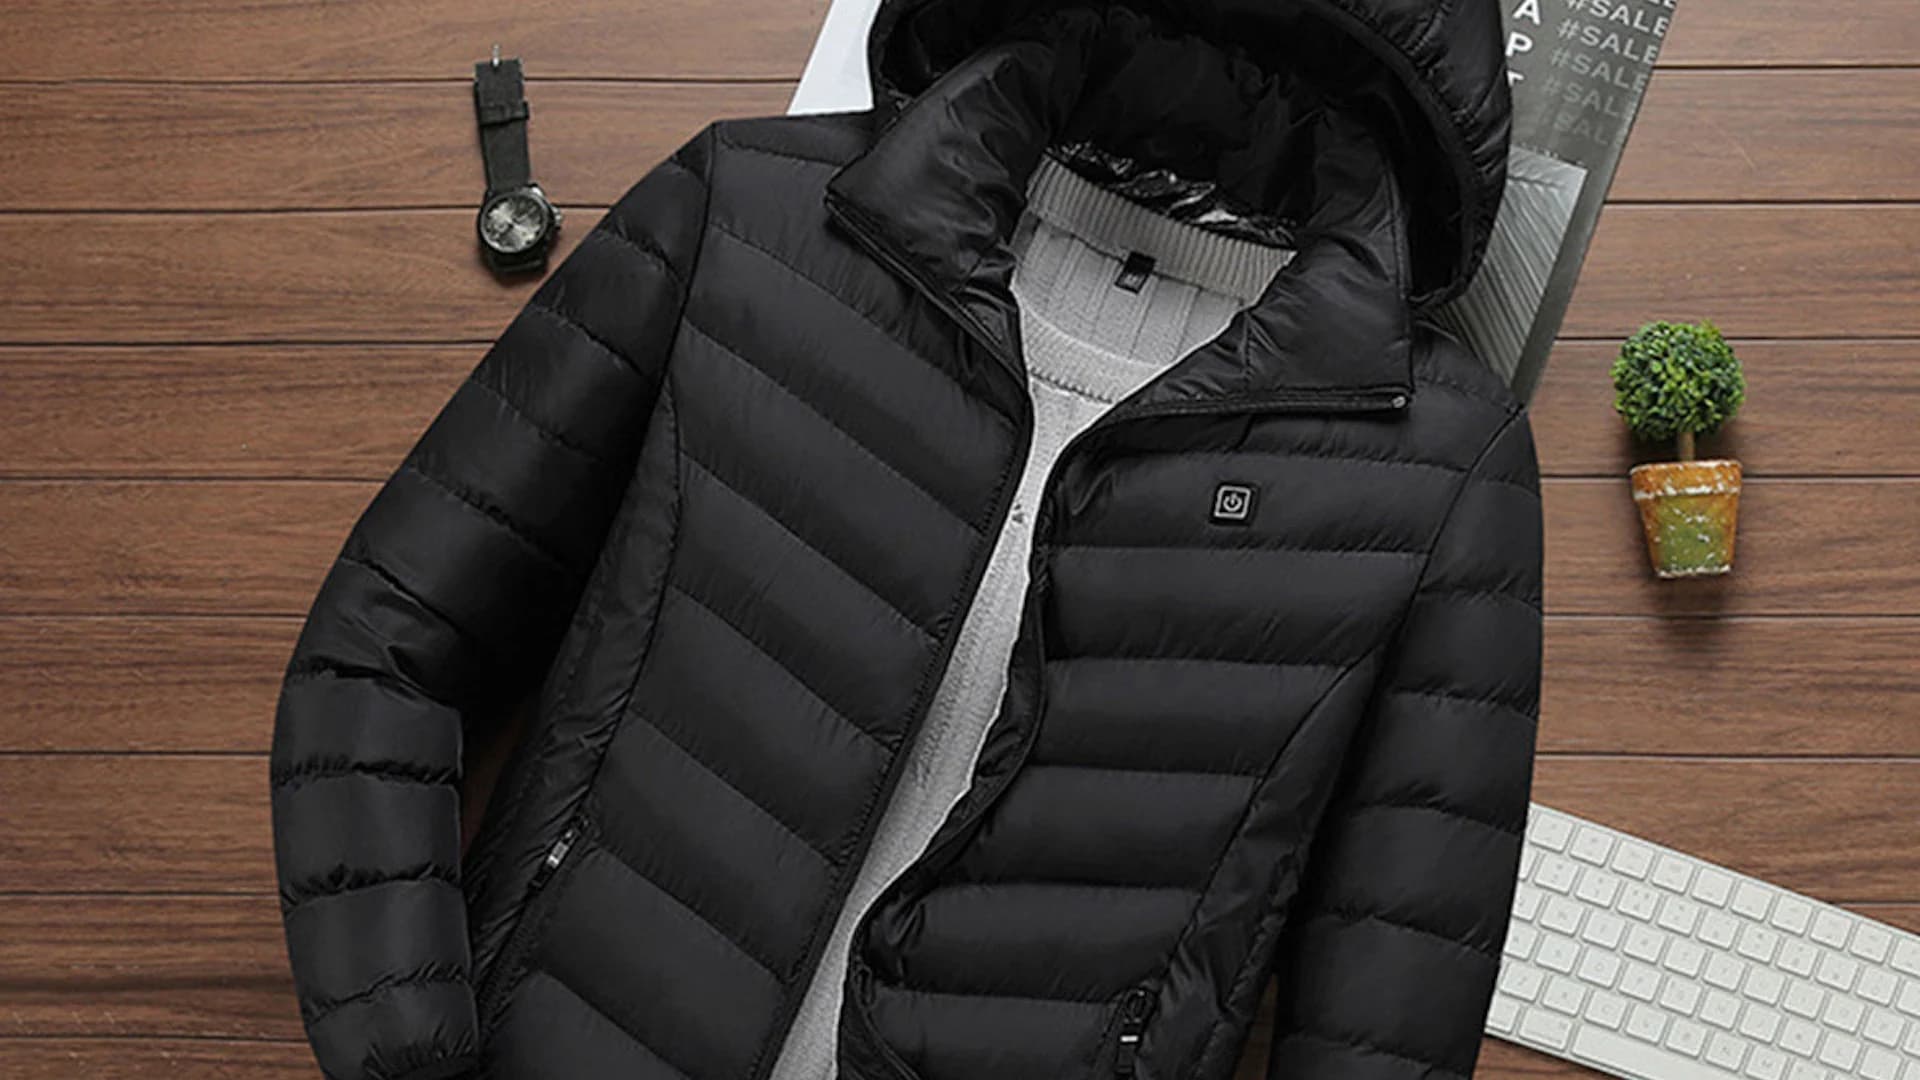 Stay warm and look good with $200 off this stylish heated jacket